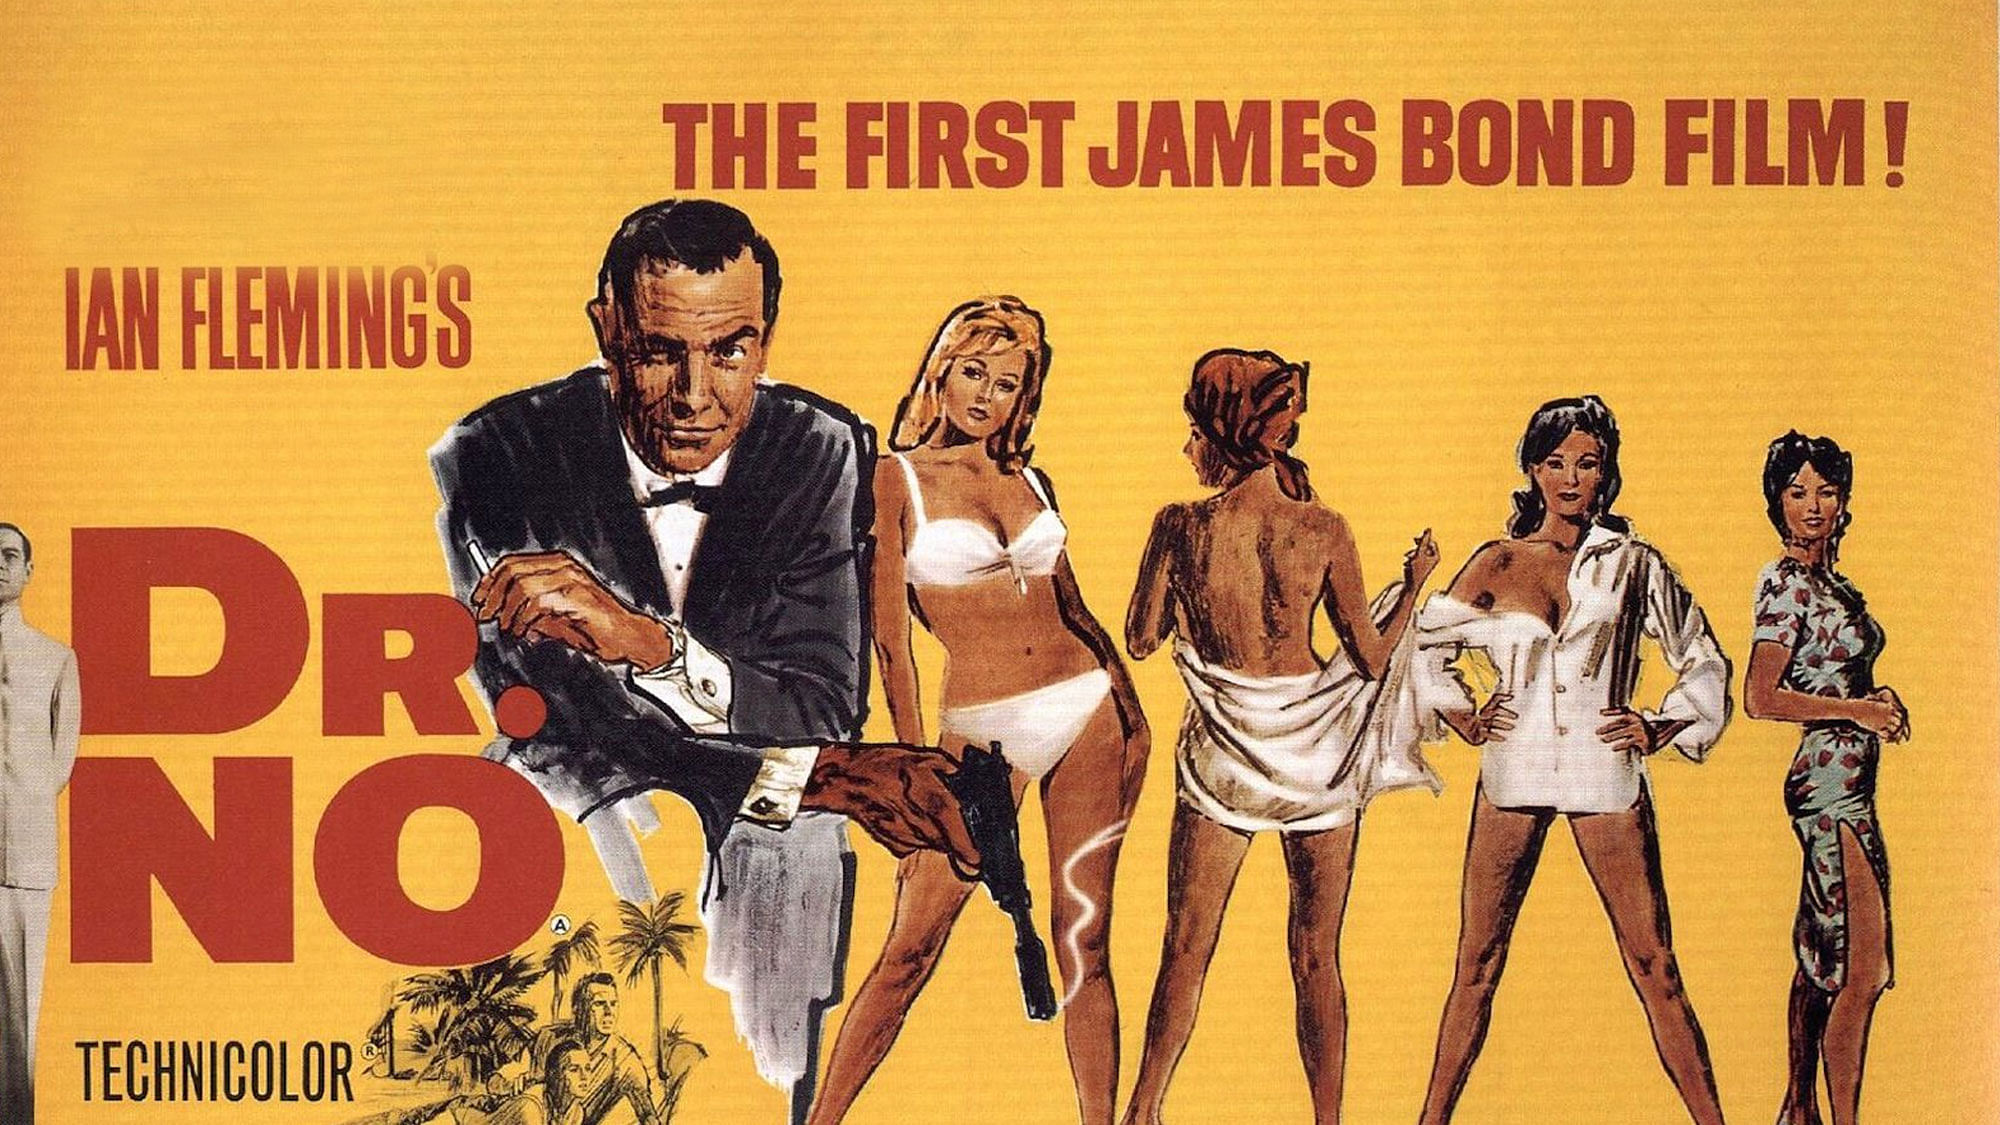 The film poster of <i>Dr. No</i>, the first James Bond film, starring Sean Connery. (Photo Courtesy: Wikimedia Commons)